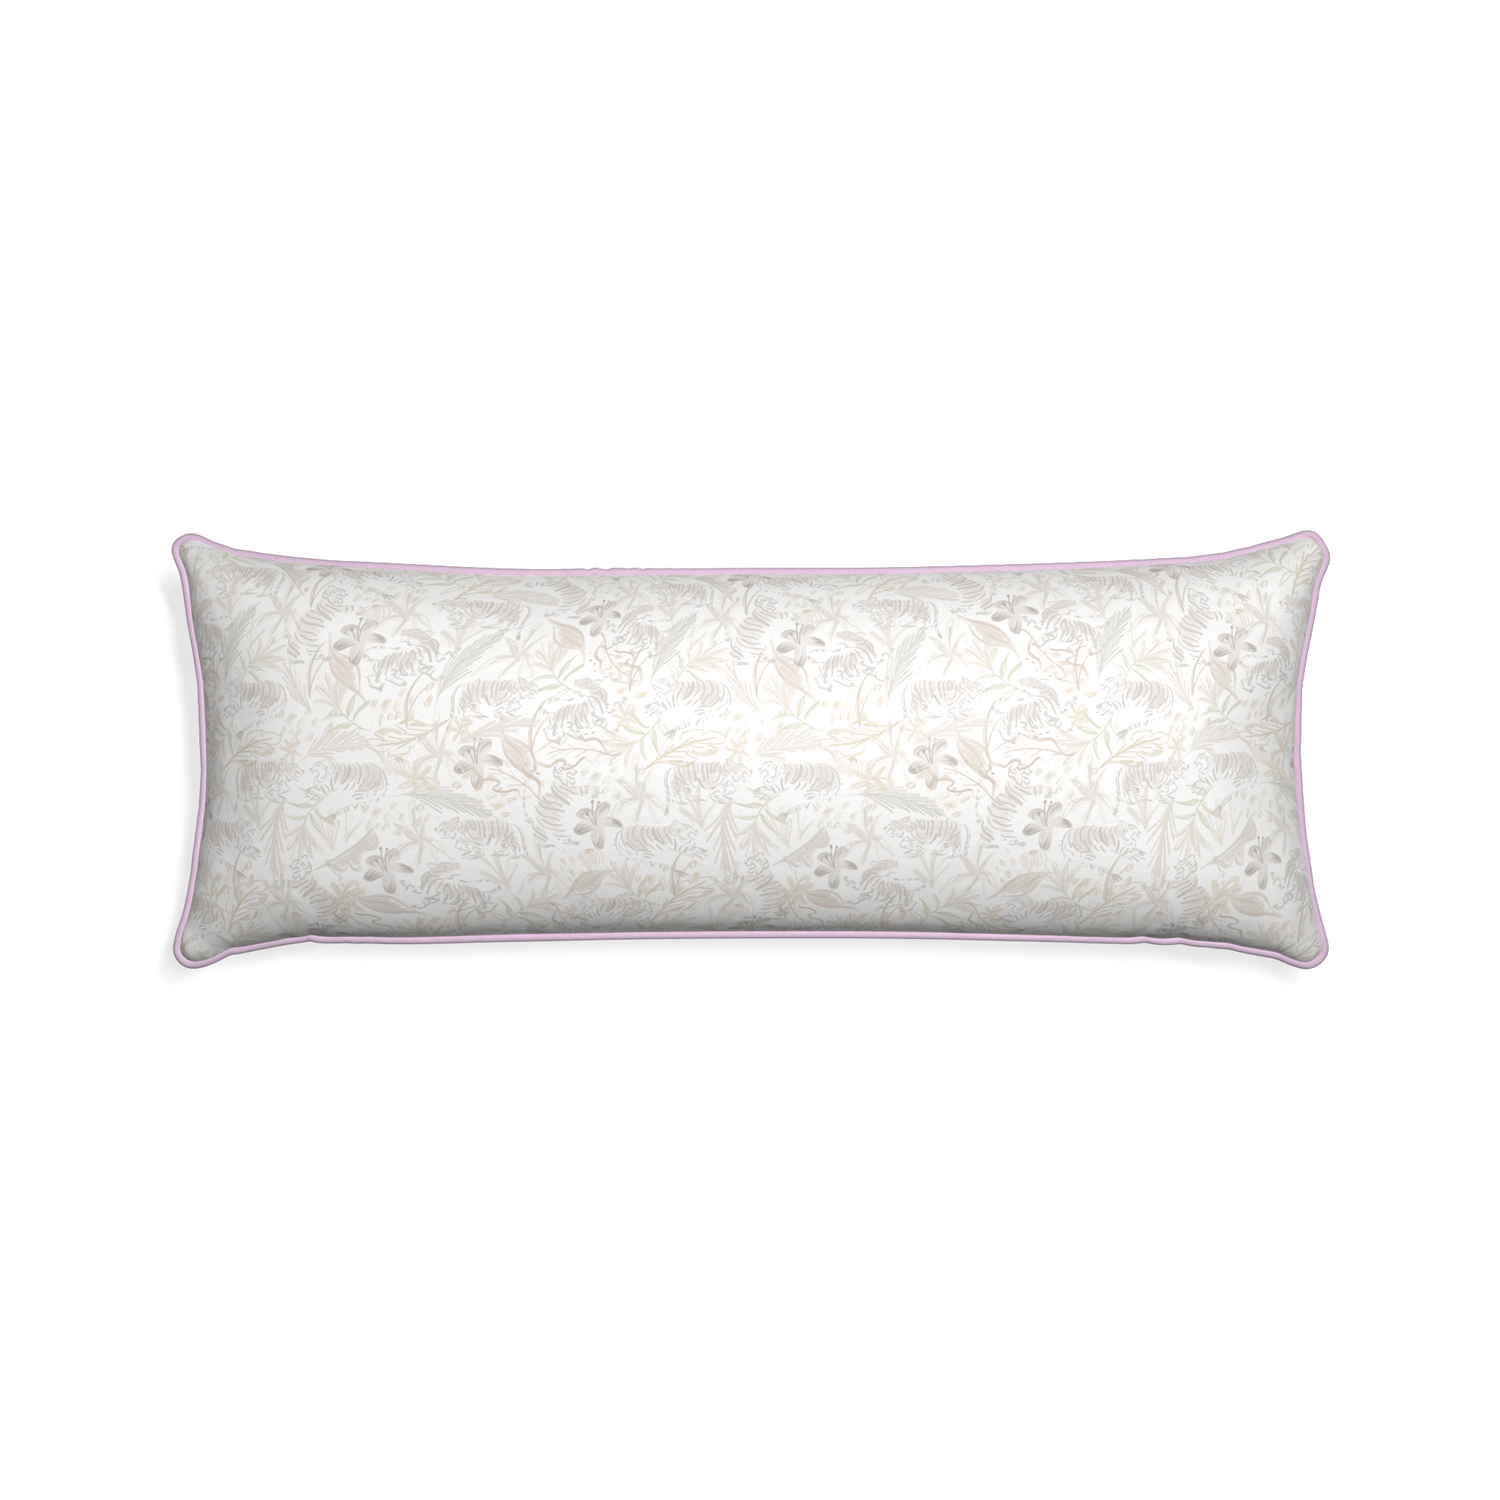 Xl-lumbar frida sand custom pillow with l piping on white background